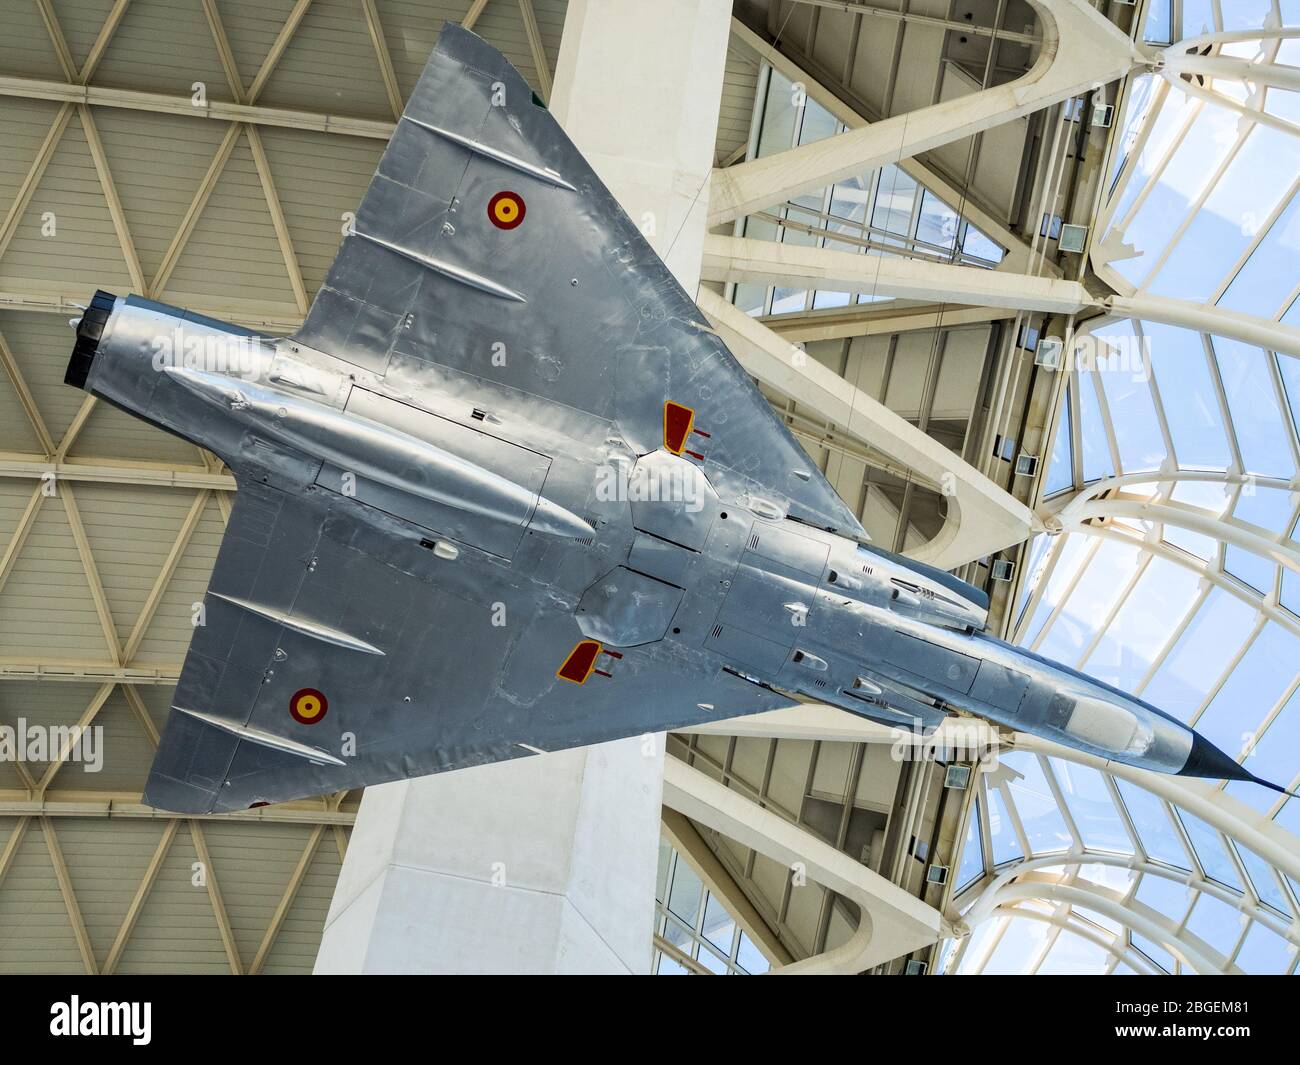 Spanish Air Force Dassault Mirage III EE jet exhibit at the Museum of Arts and Sciences Valencia or Príncipe Felipe Science Museum Valencia. Stock Photo